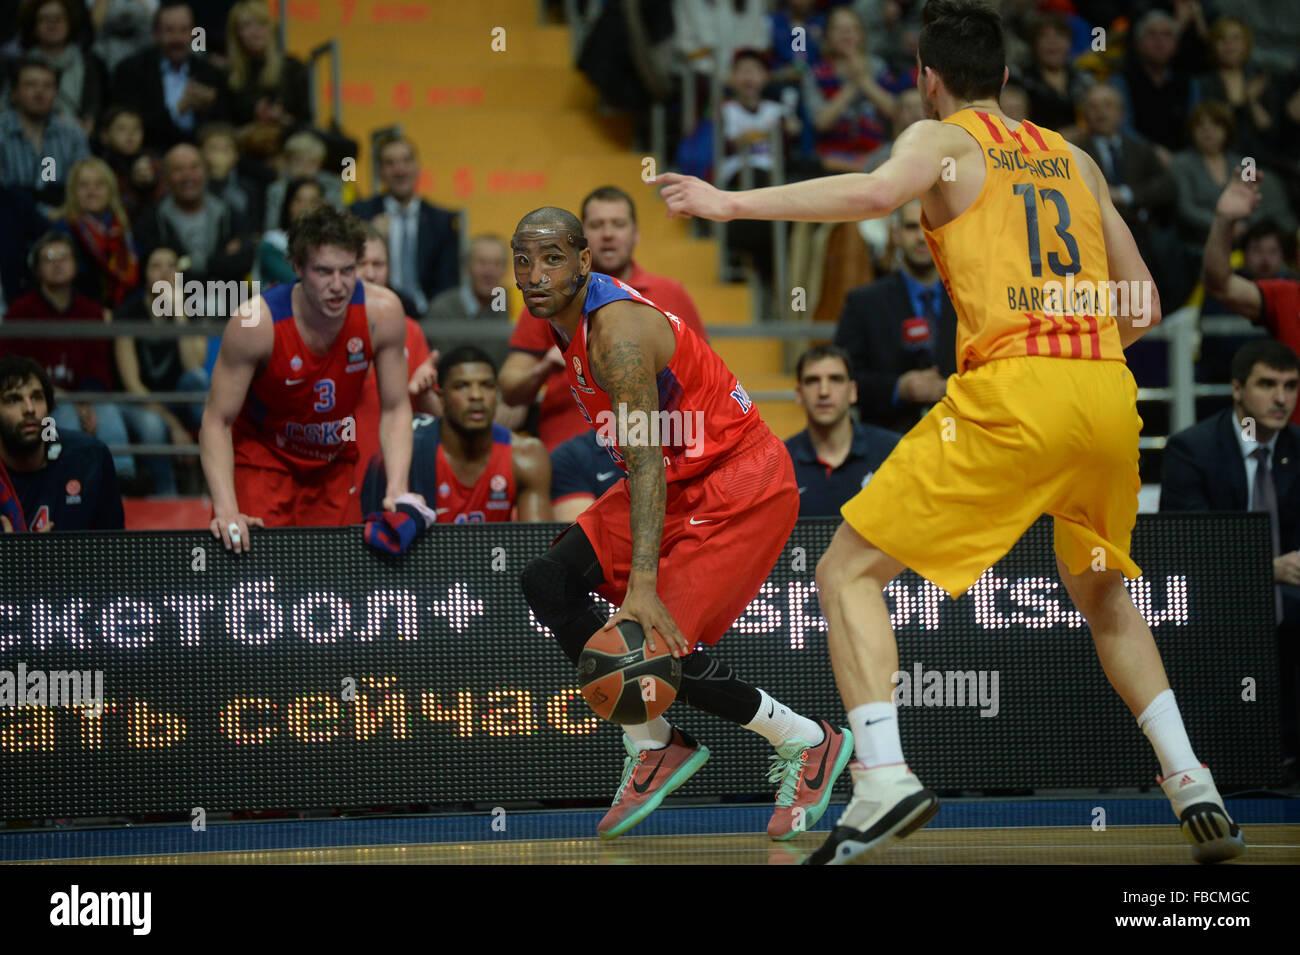 Moscow, Russia. 14th Jan, 2016. Aaron Jackson (L) of CSKA Moscow drives the ball during the Basketball Euroleague Top 16 match against Tomas Satoransky of Barcelona in Moscow, Russia, Jan. 14, 2016. CSKA Moscow won 93-82. © Pavel Bednyakov/Xinhua/Alamy Live News Stock Photo